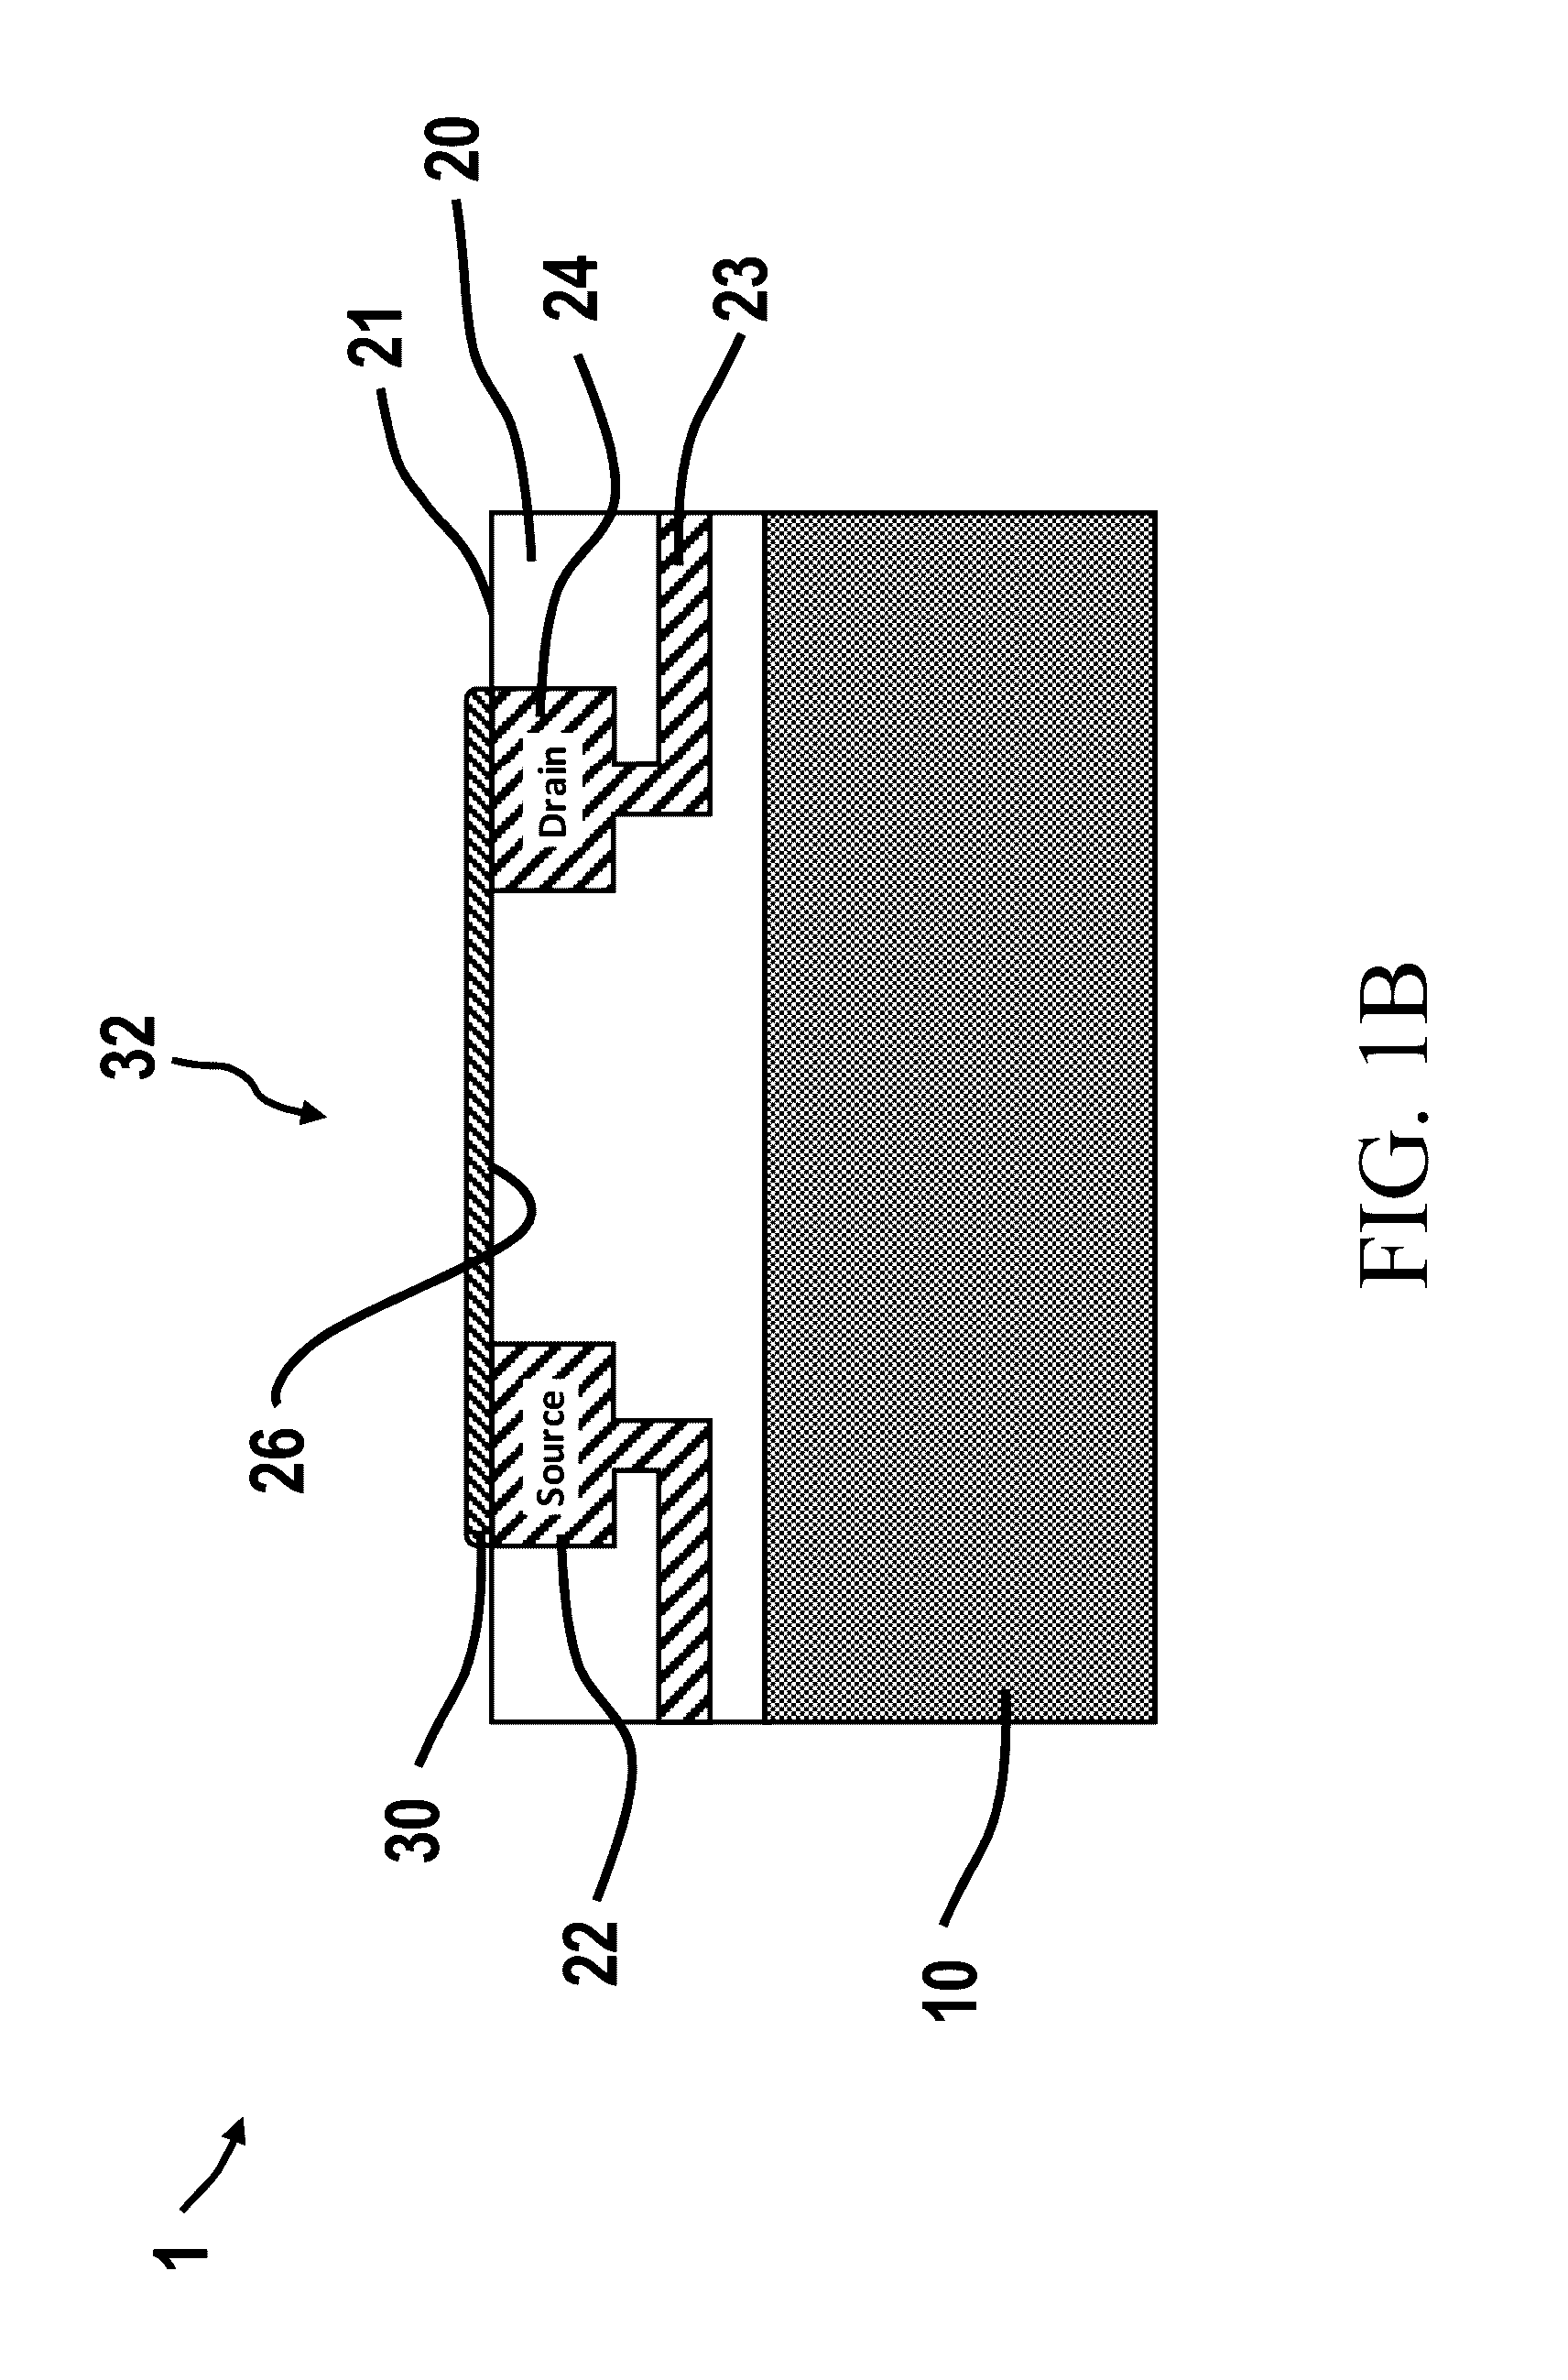 Chemically-sensitive field effect transistors, systems, and methods for manufacturing and using the same